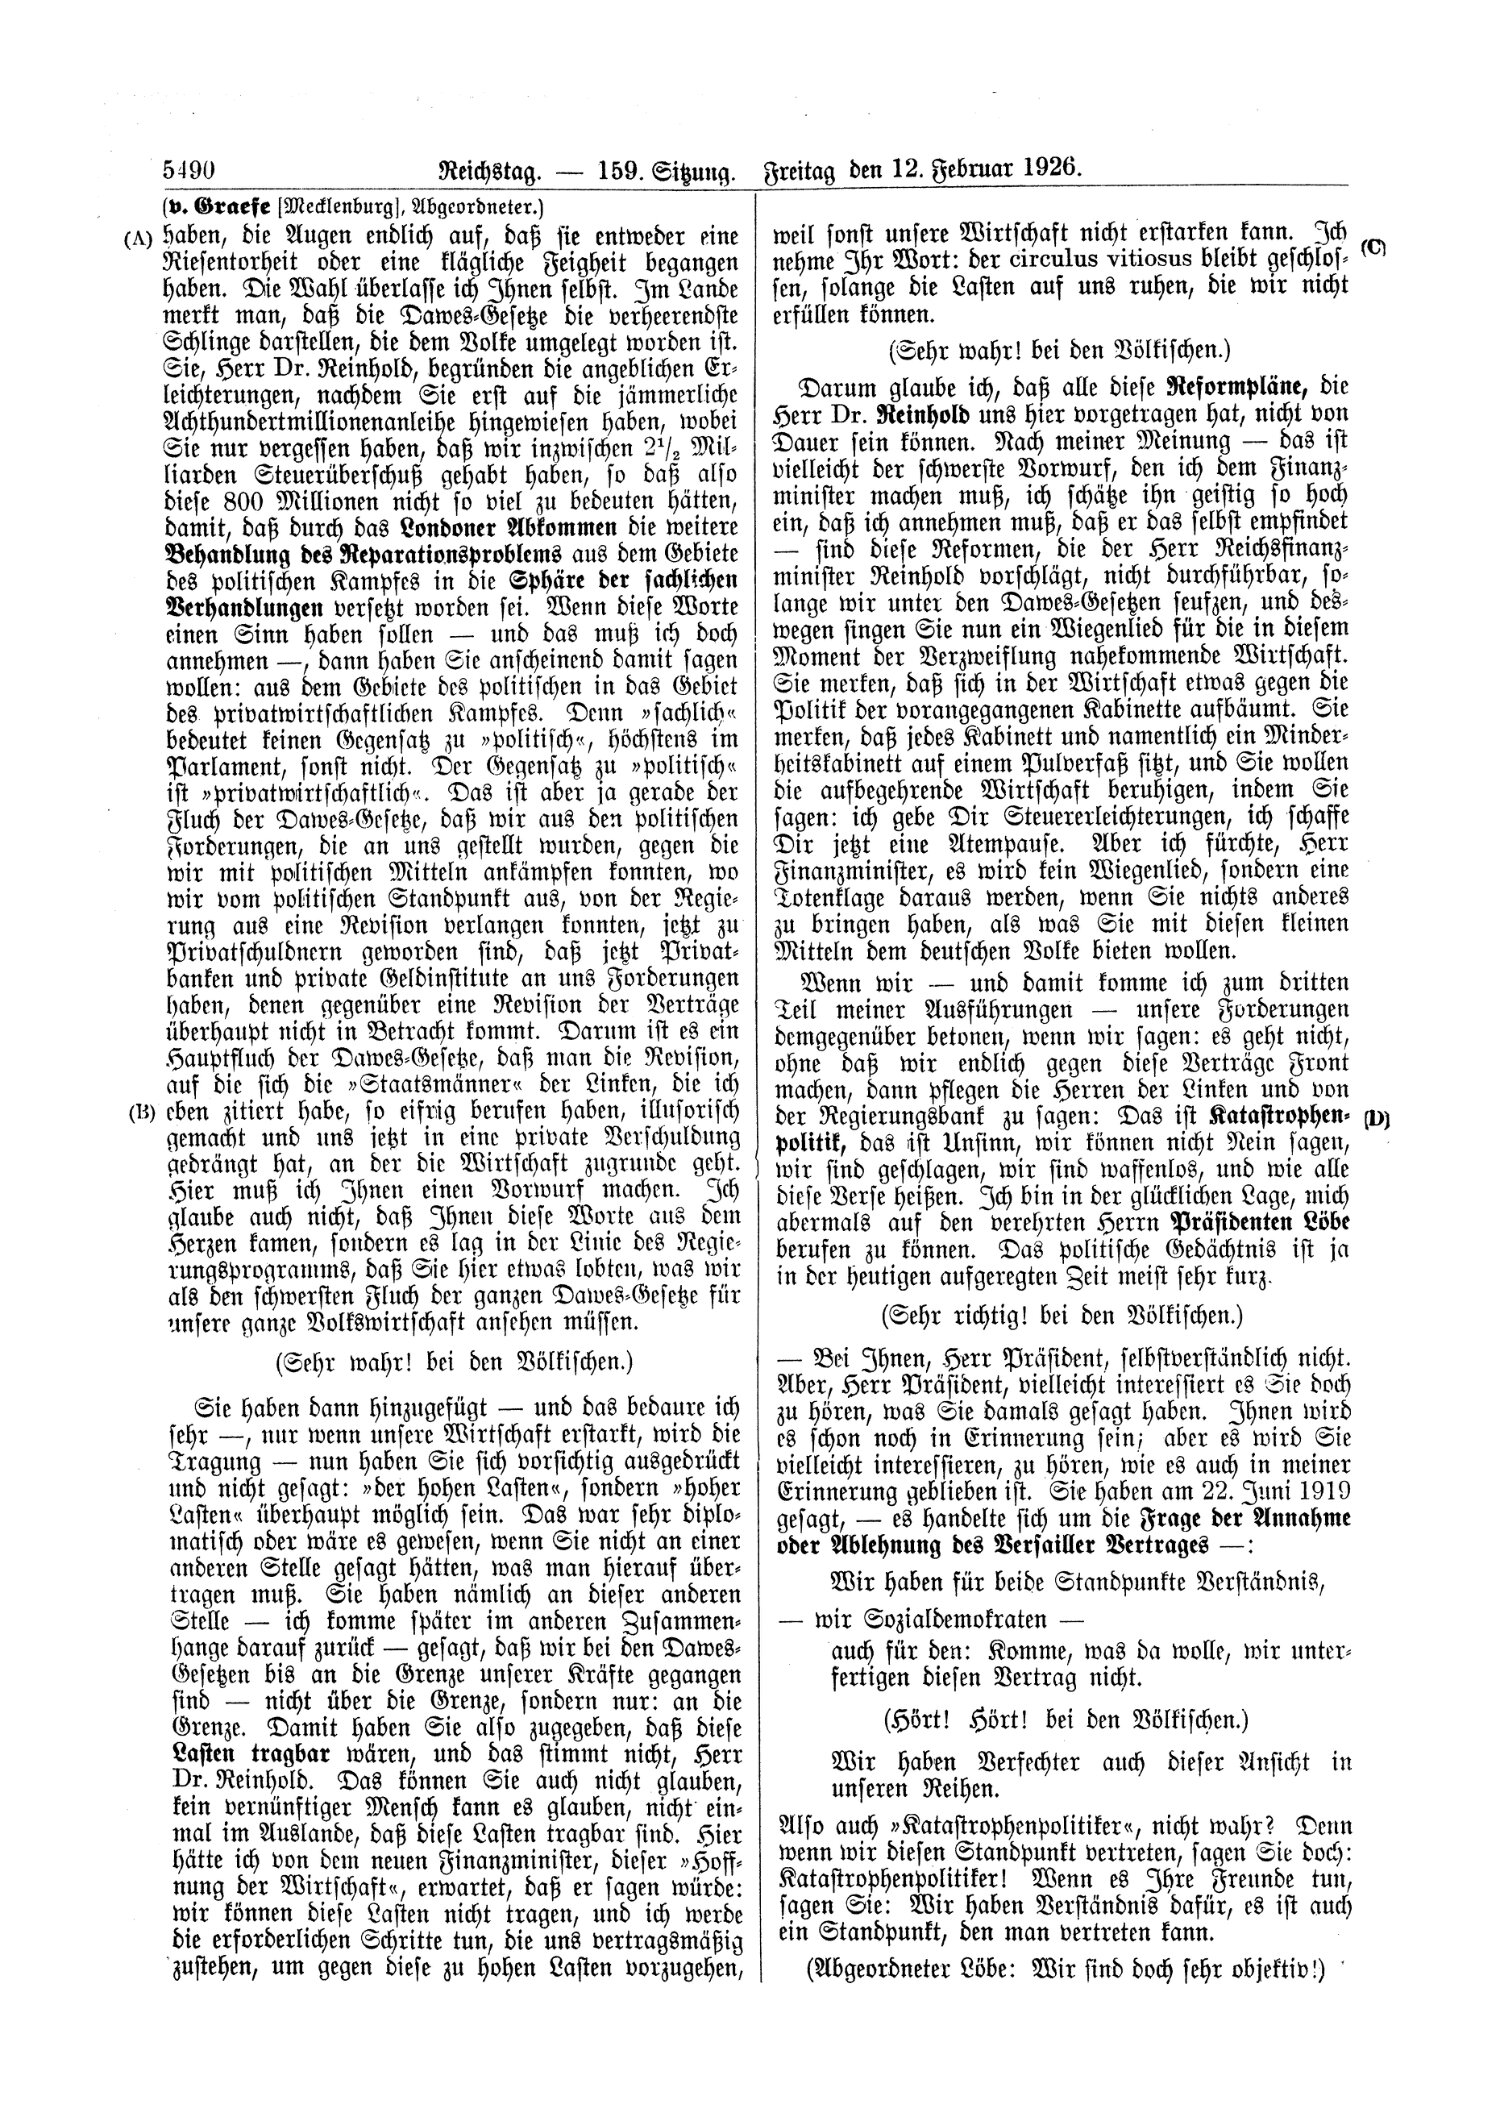 Scan of page 5490